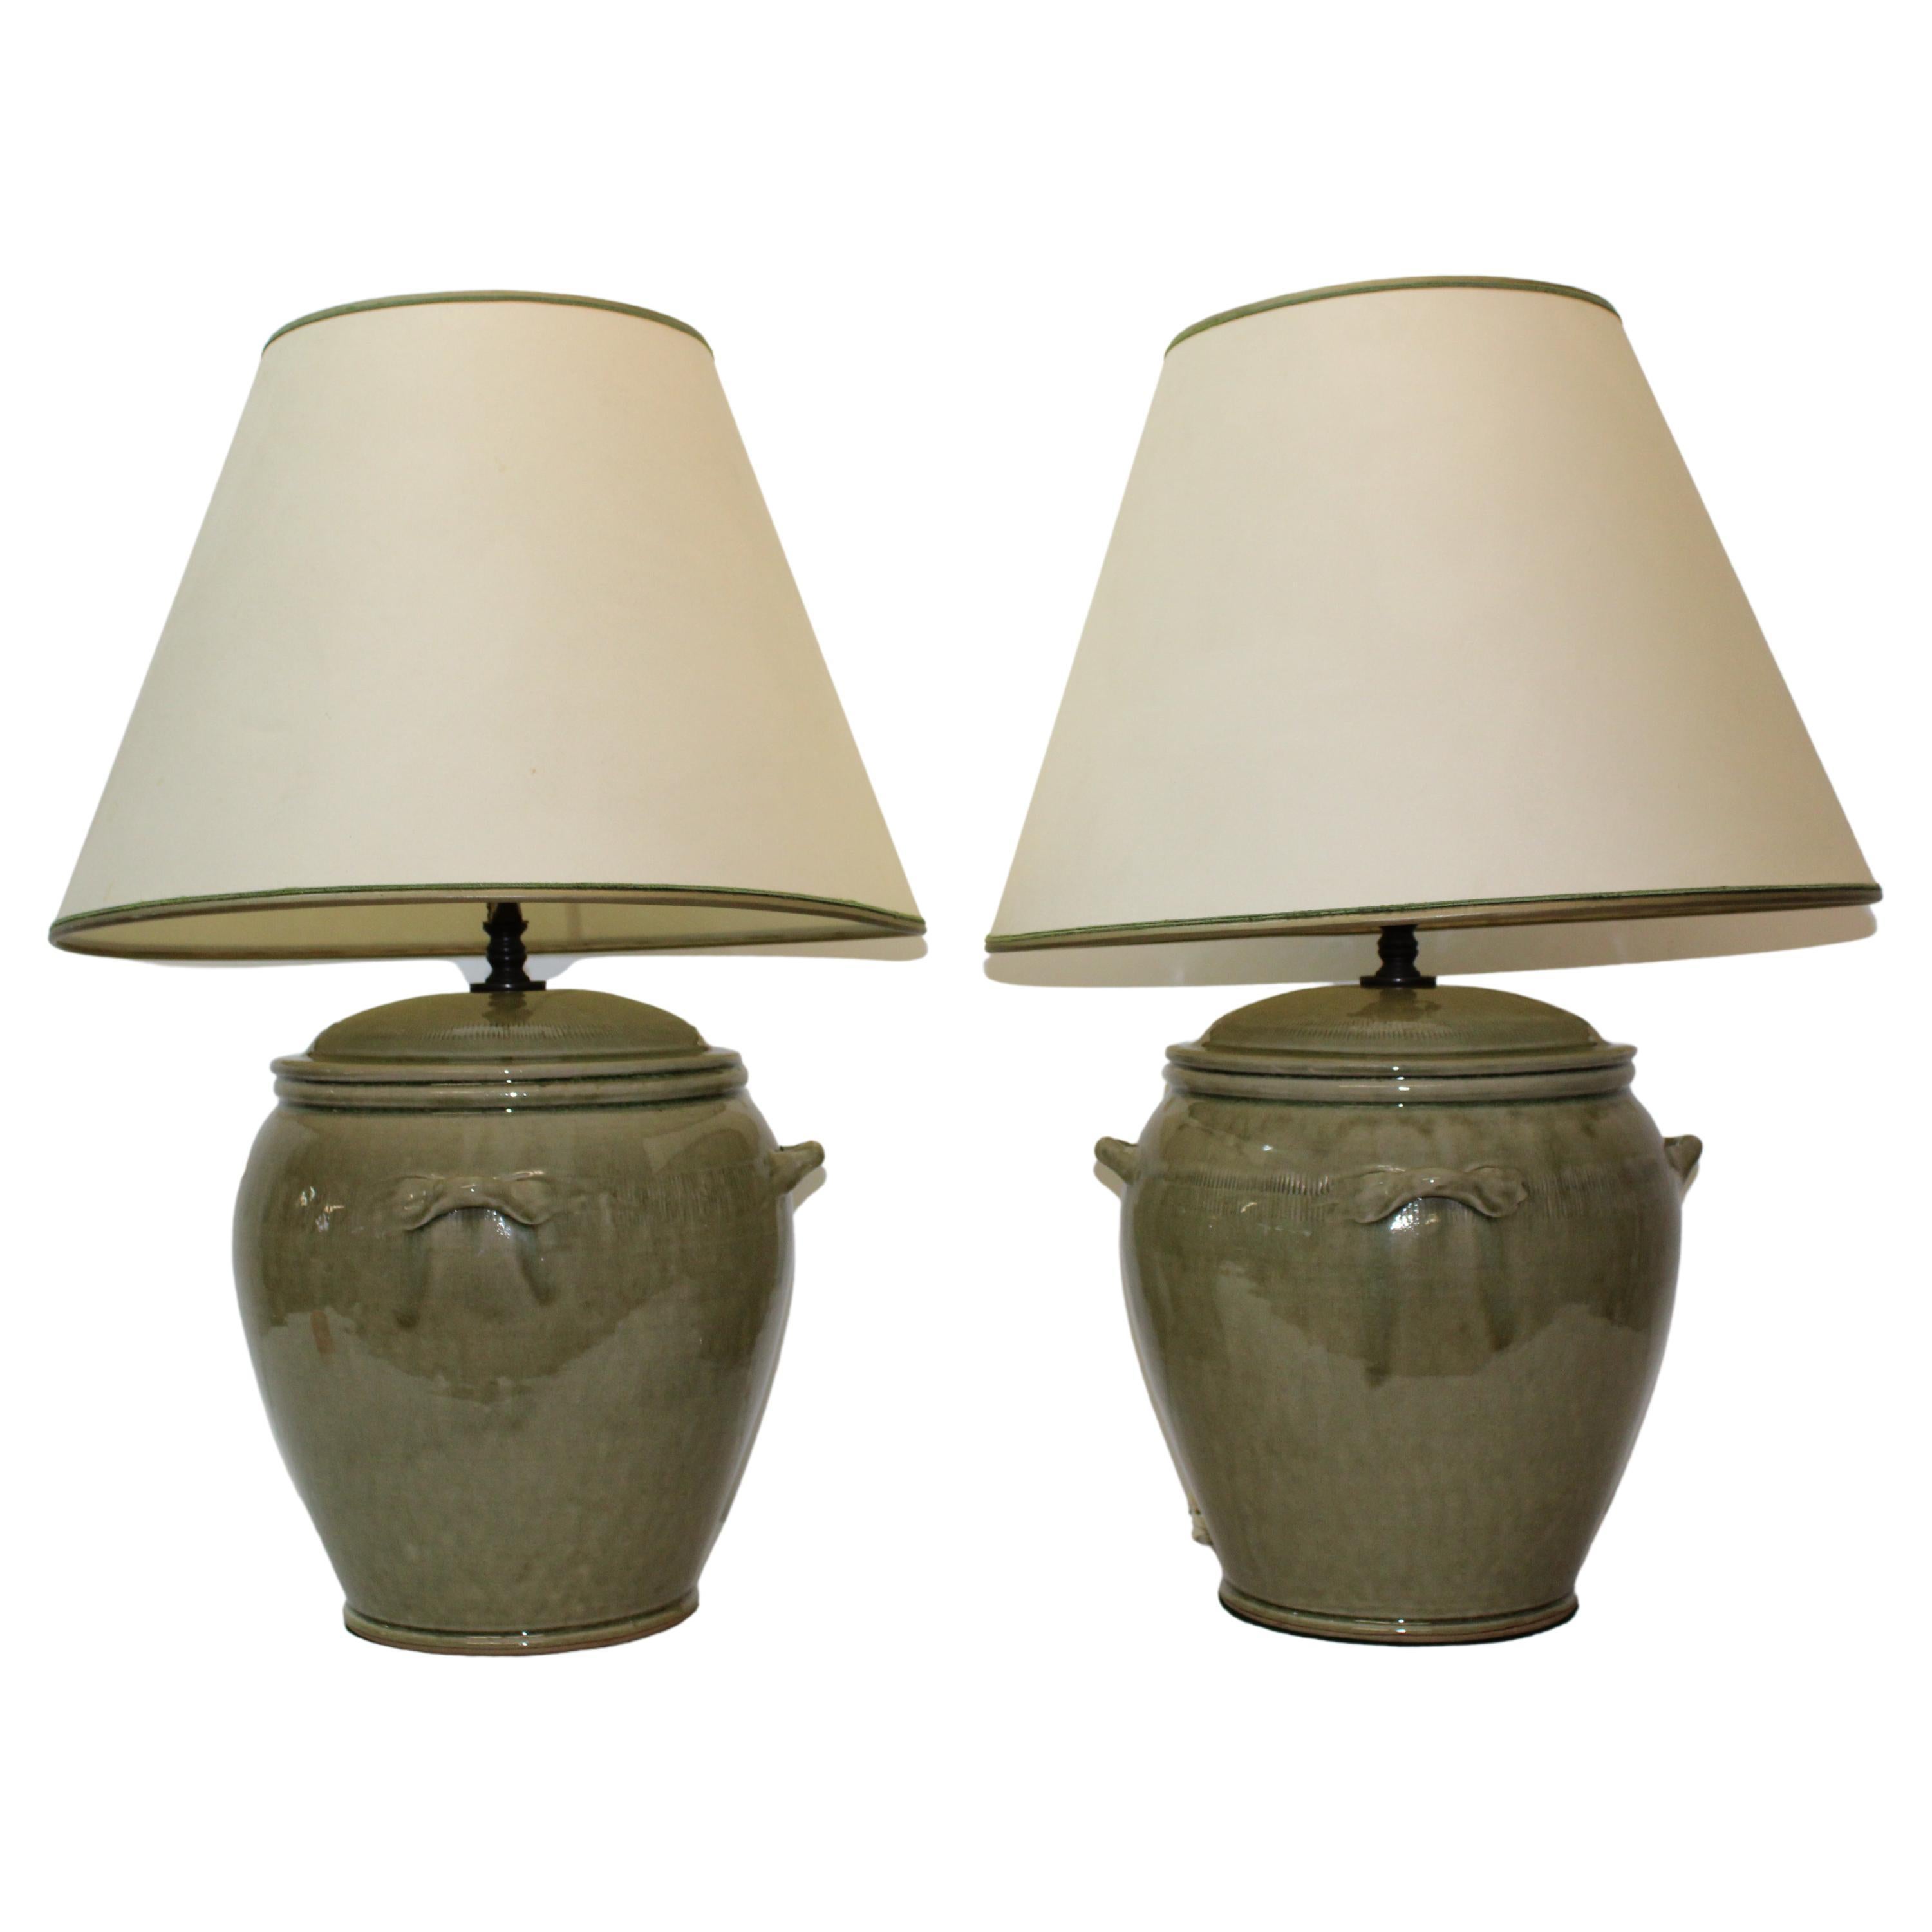 Glazed Ceramic Table Lamps 'Asian Style'